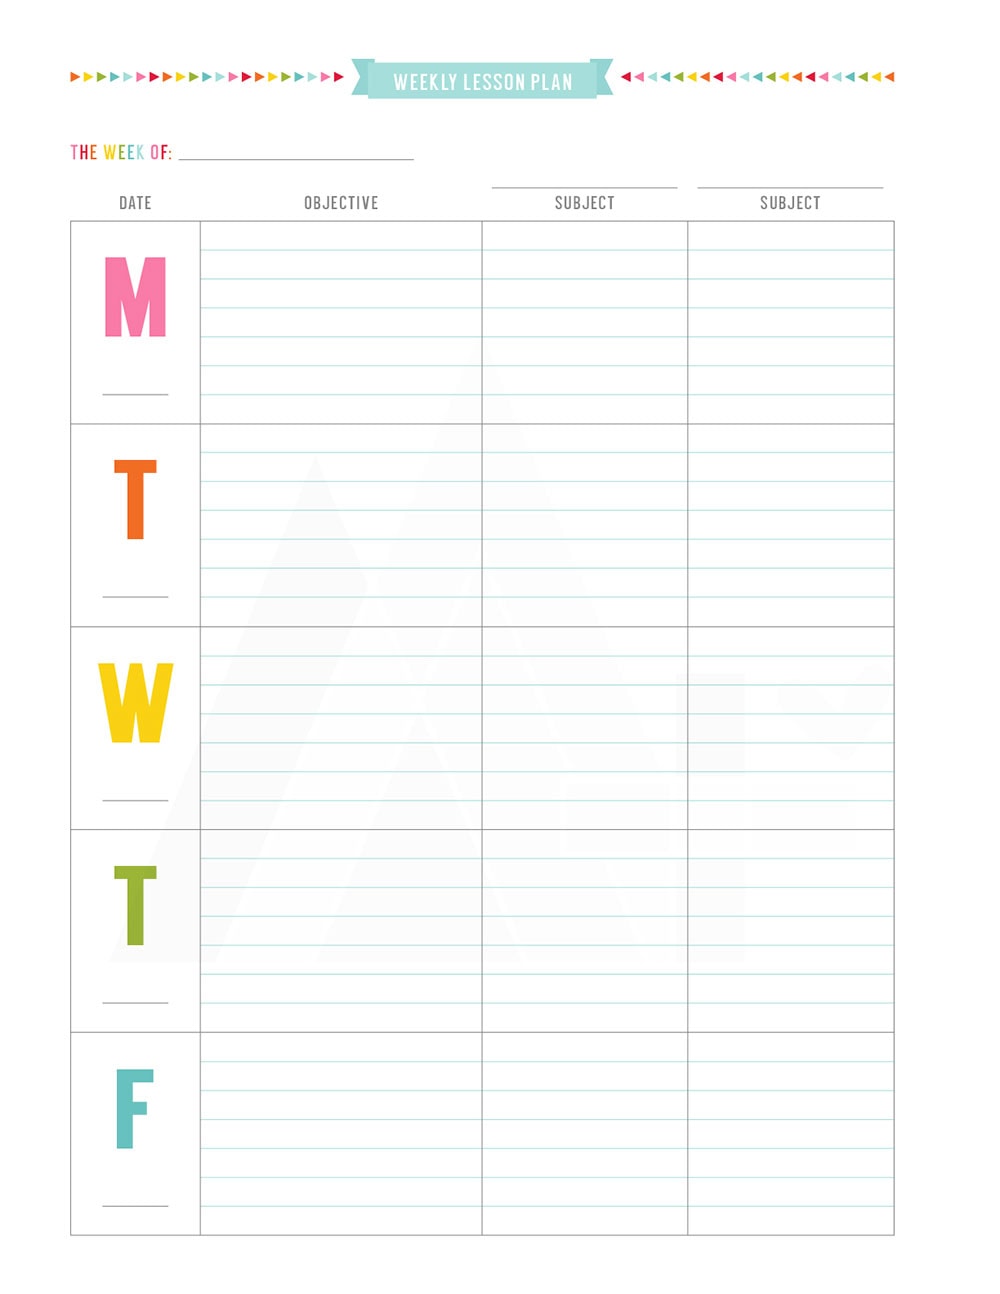 Weekly lesson planner for teachers